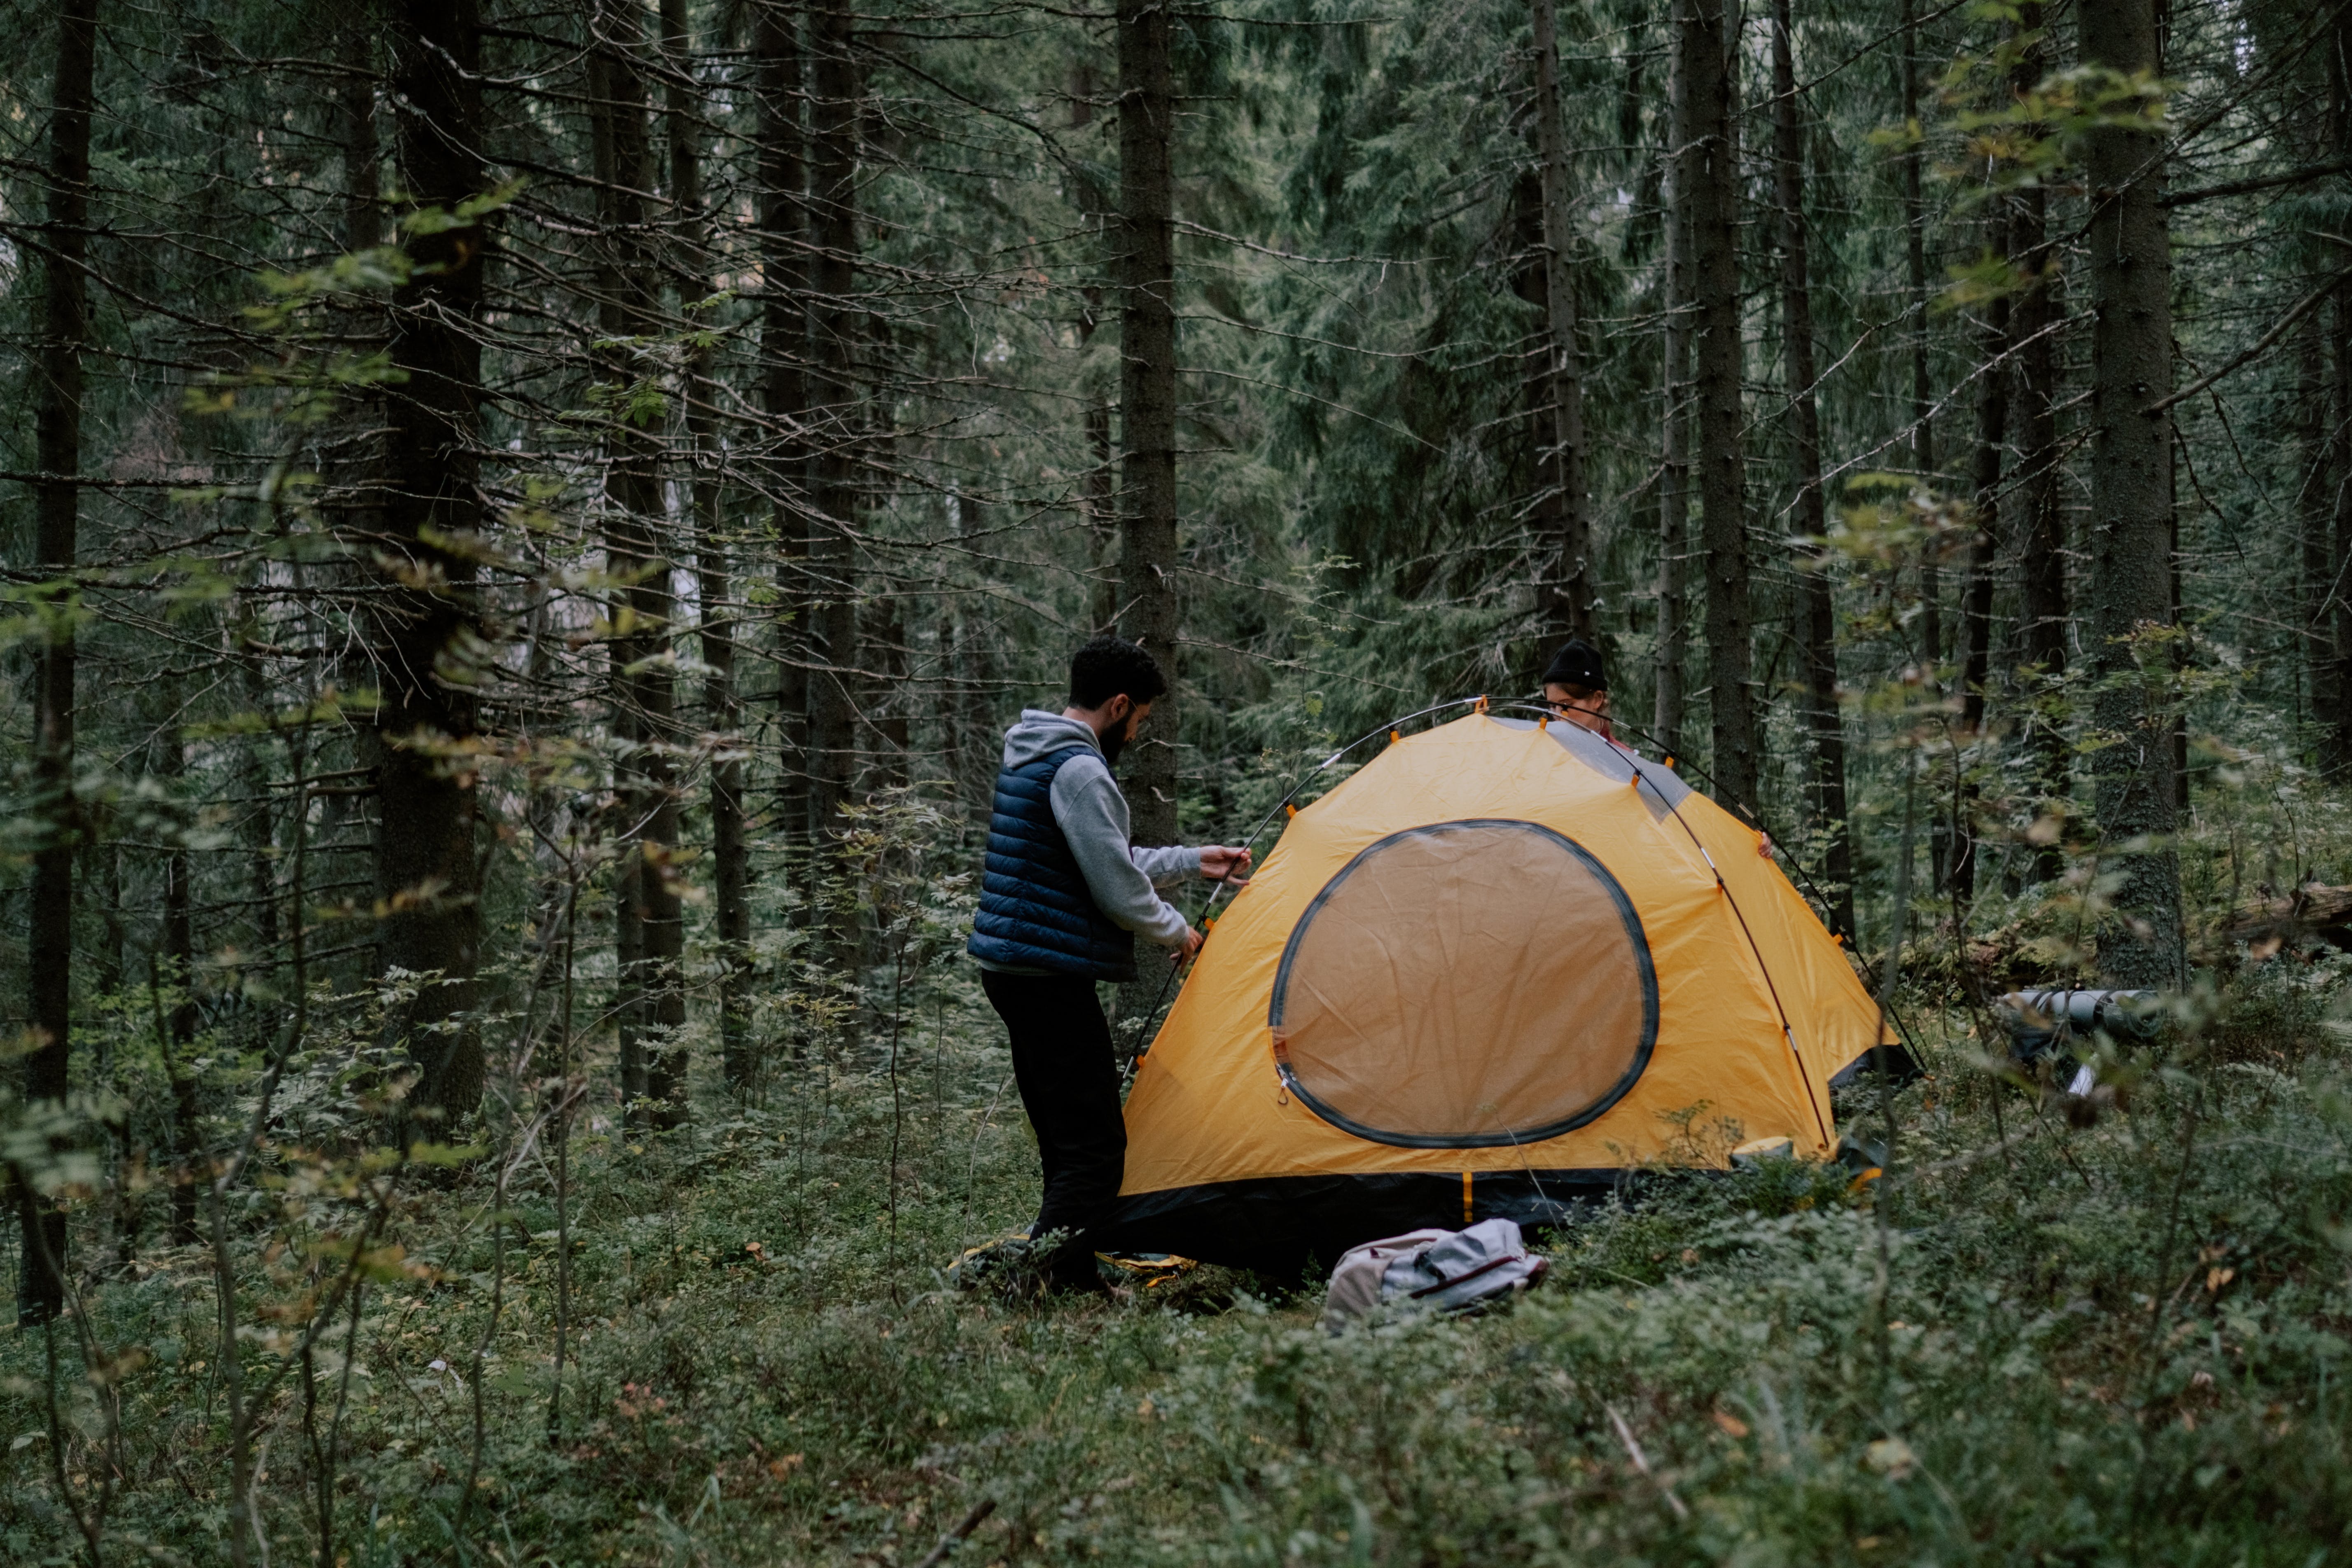 A man putting up his tent in the forest | Source: Pexels